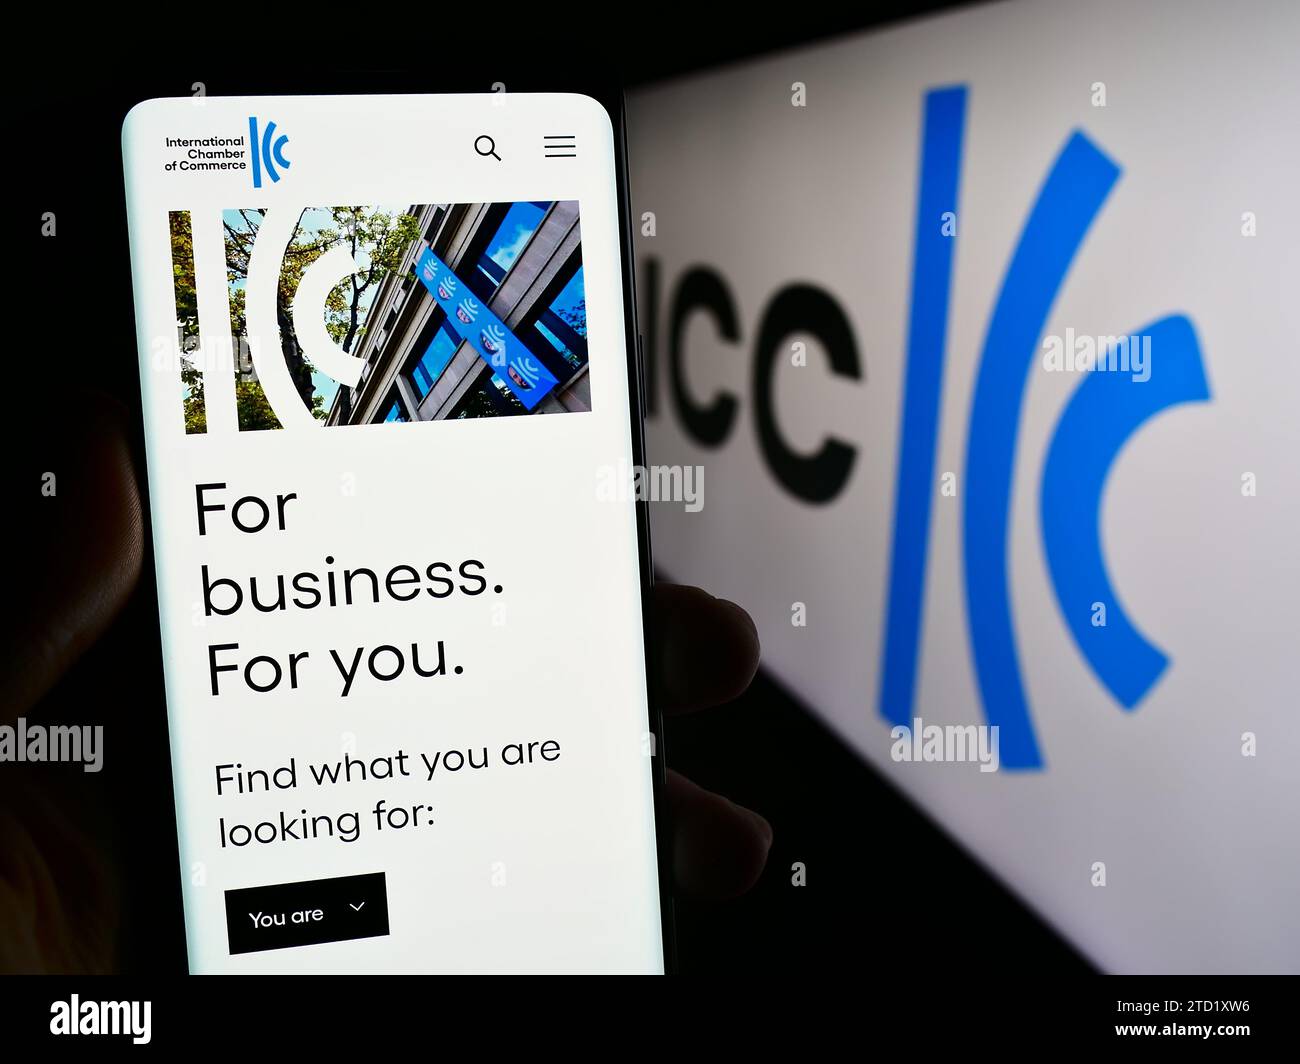 Person holding mobile phone with web page of organisation International Chamber of Commerce (ICC) with logo. Focus on center of phone display. Stock Photo